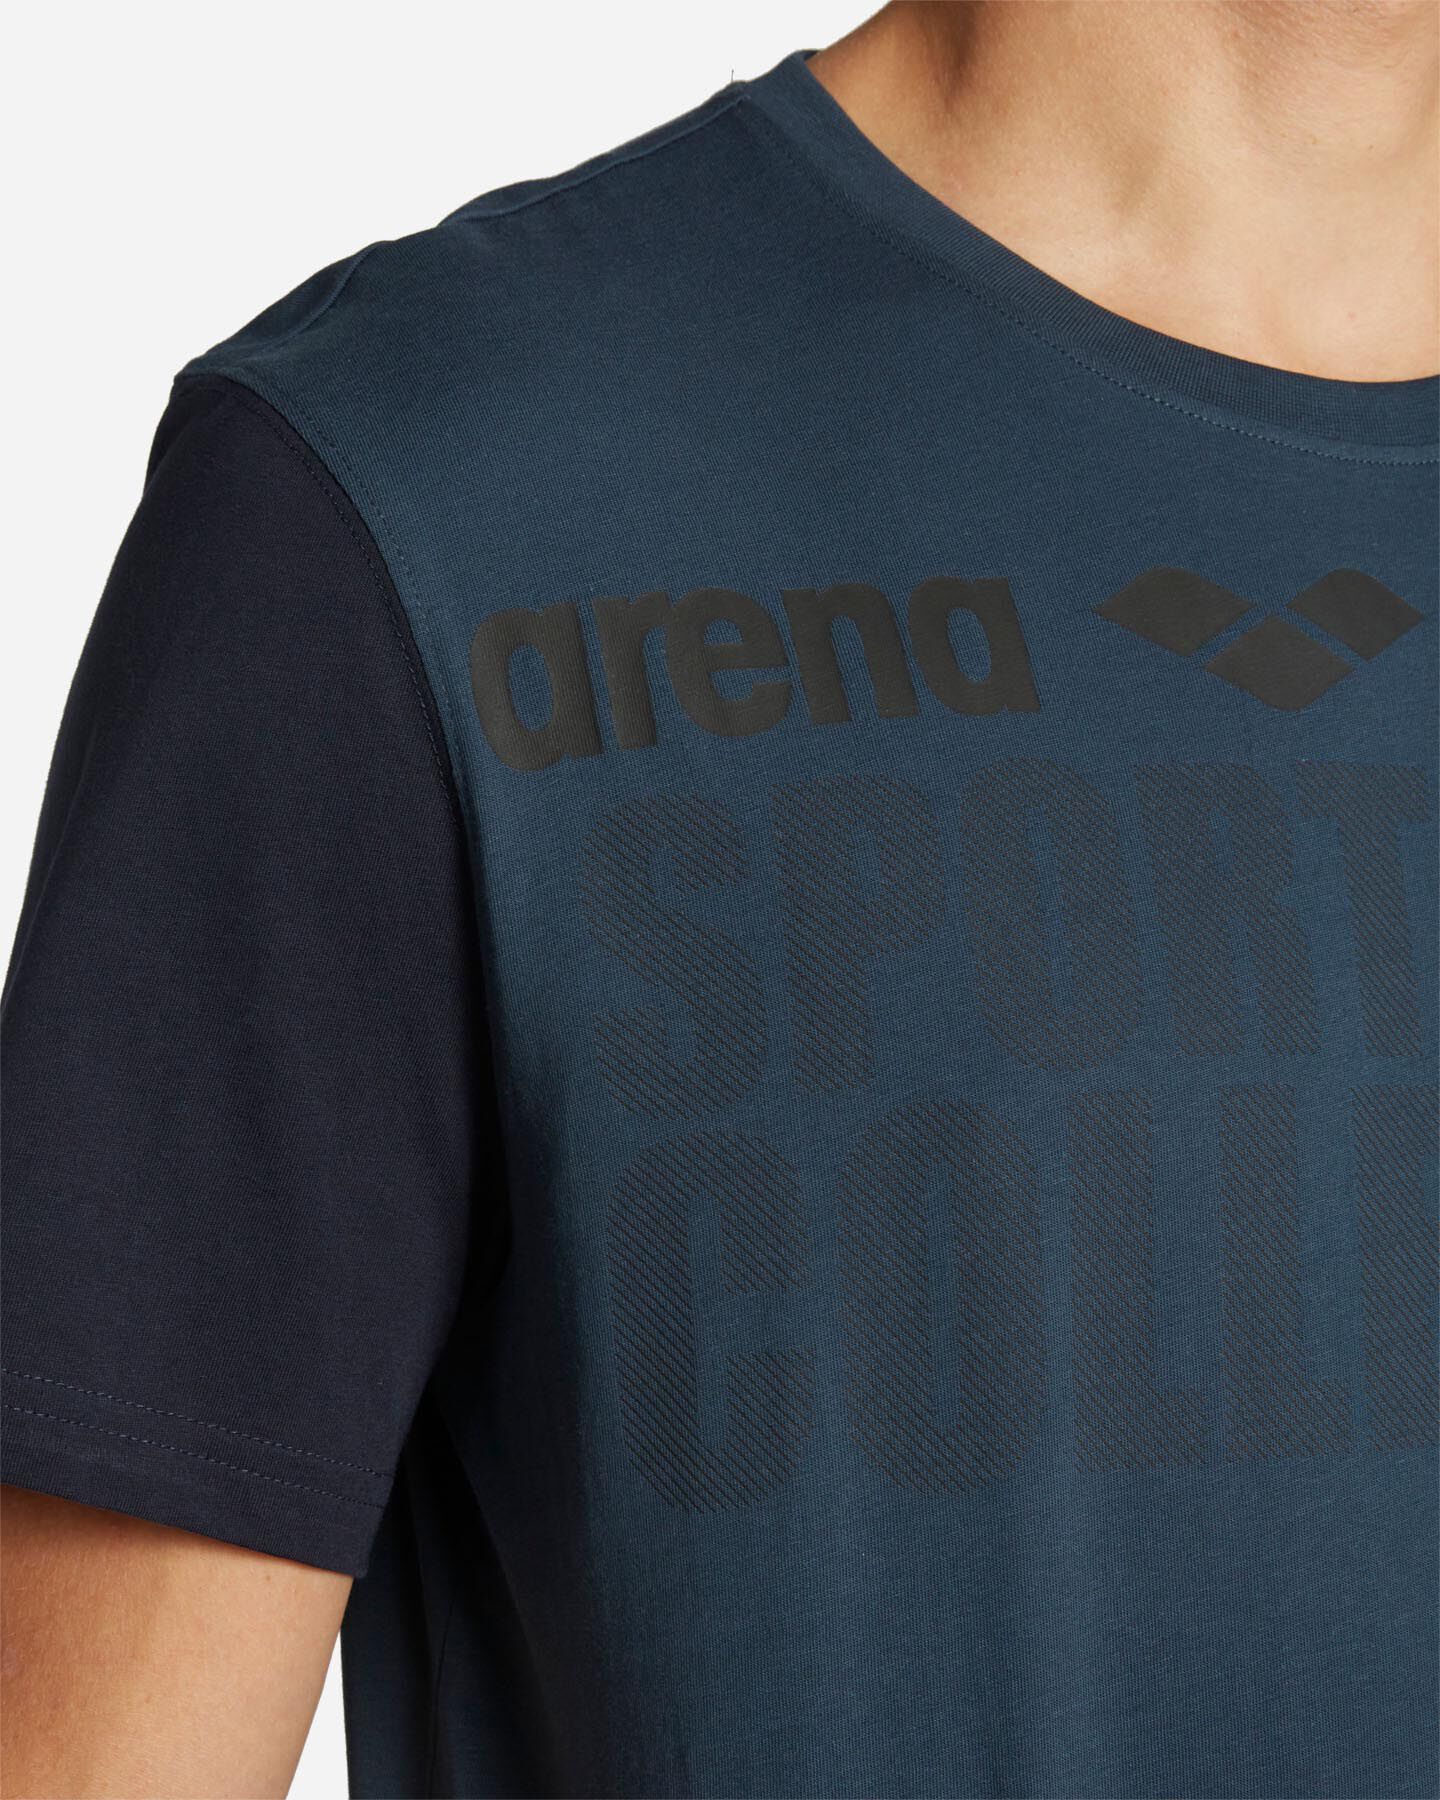  T-Shirt ARENA LIFESTYLE M S4124525|516|XL scatto 4